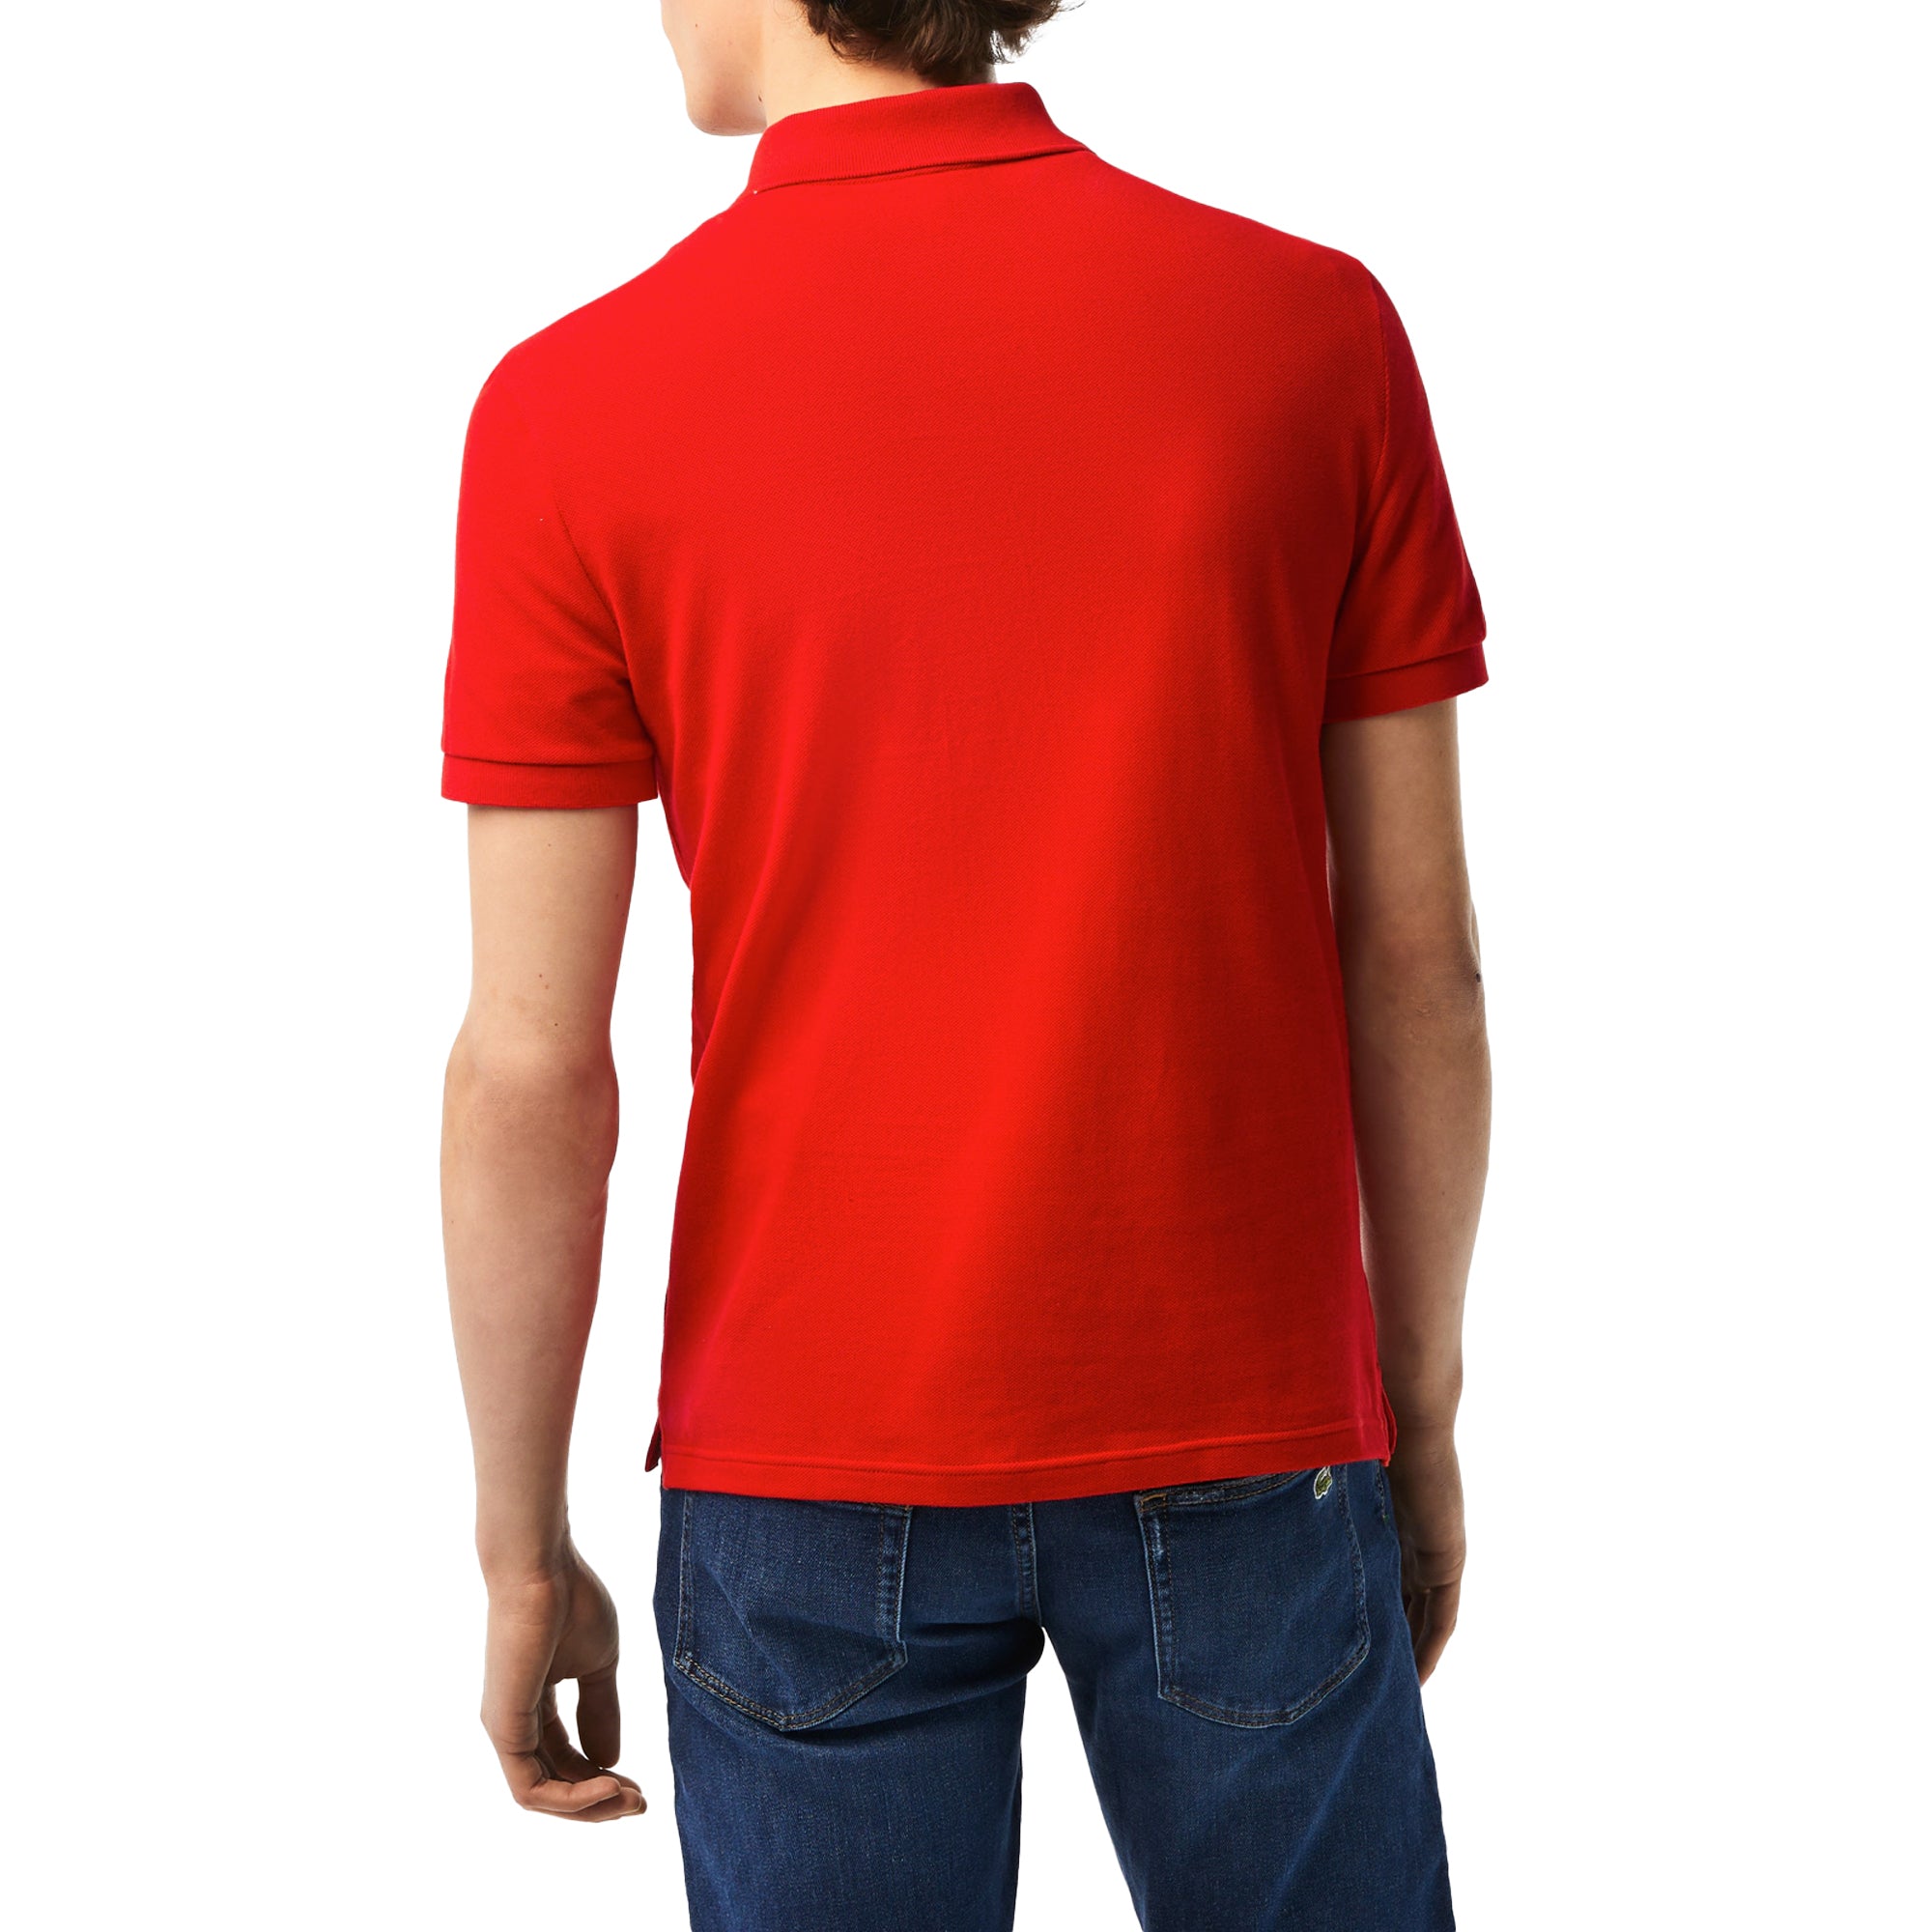 Lacoste Short Sleeved Slim Fit Polo PH4012 - Bright Red